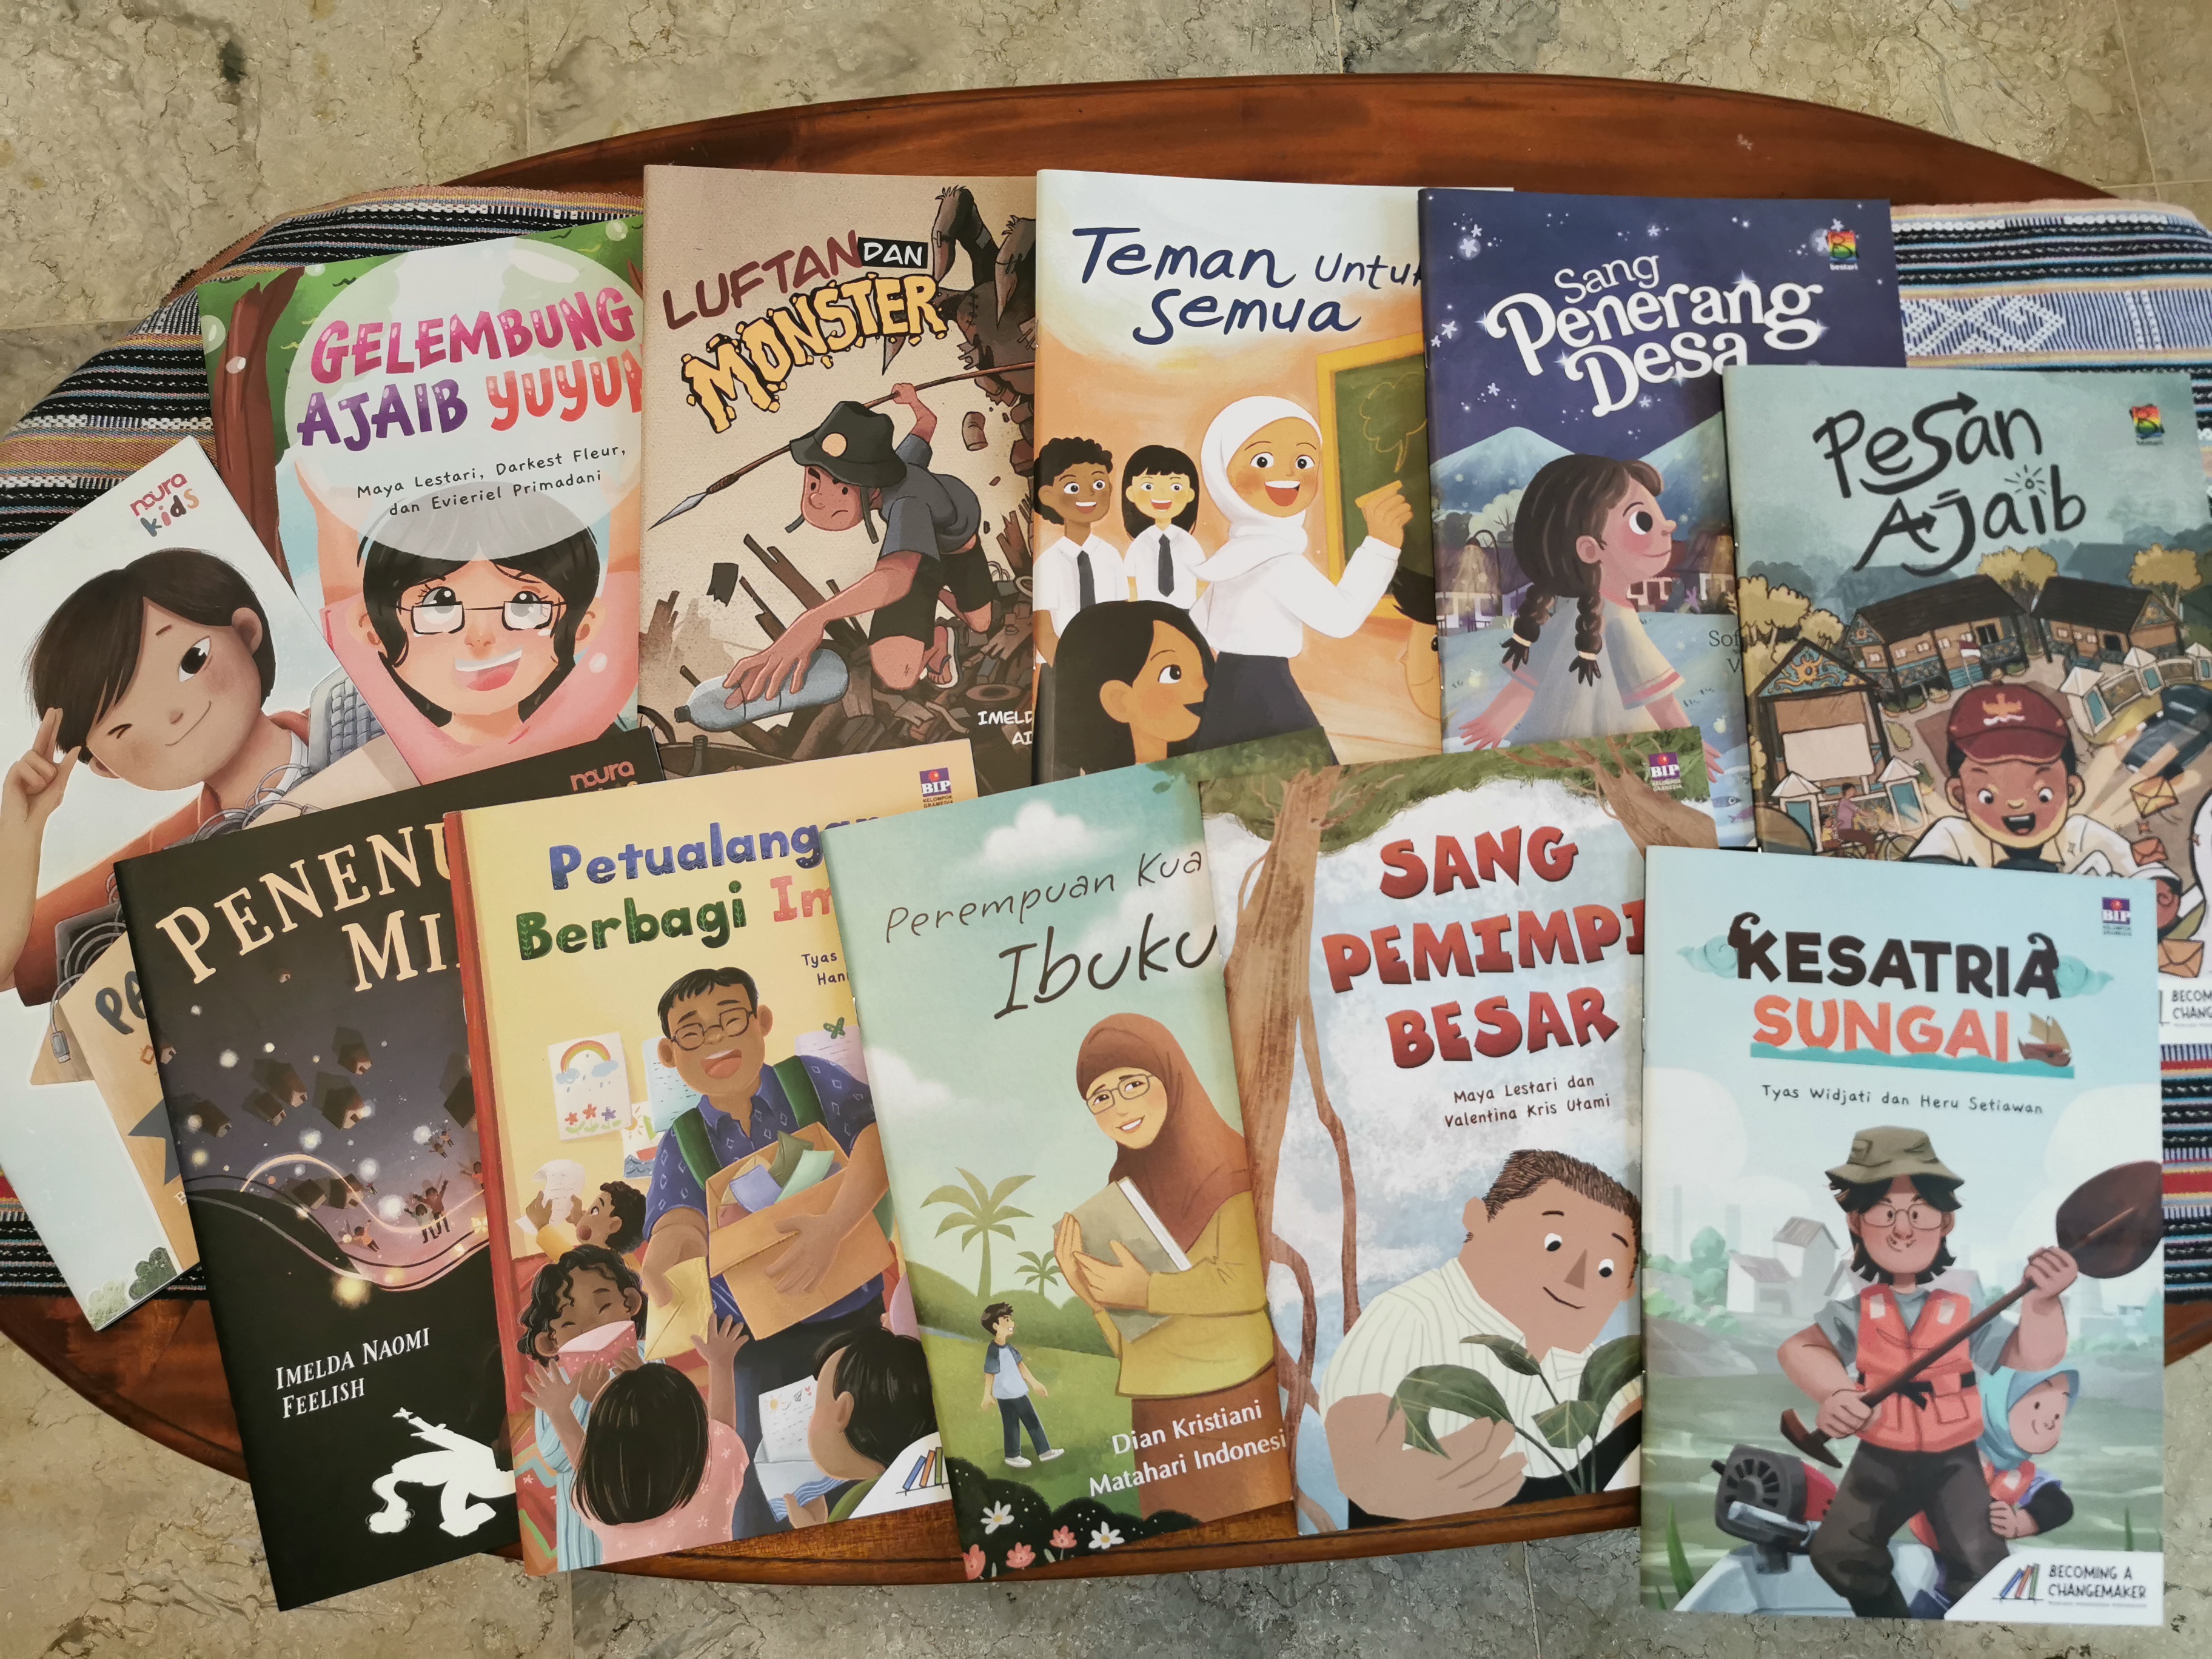 The children's books from Ashoka Indonesia's "Becoming a Changemaker" series lie displayed on a table